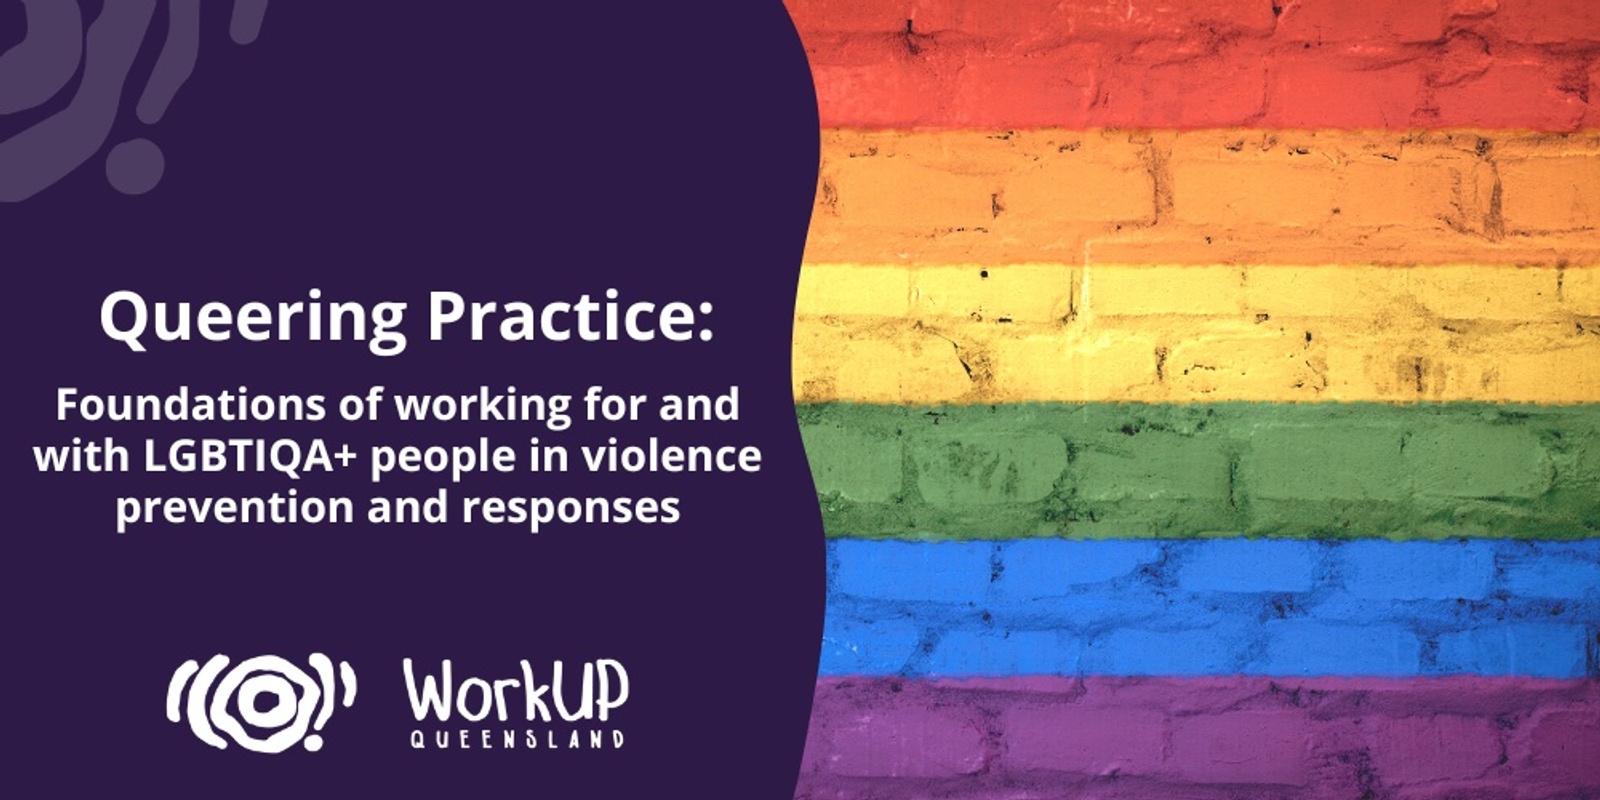 Queering practice: Foundations of working for and with LGBTIQA+ people in violence prevention and responses (Townsville)